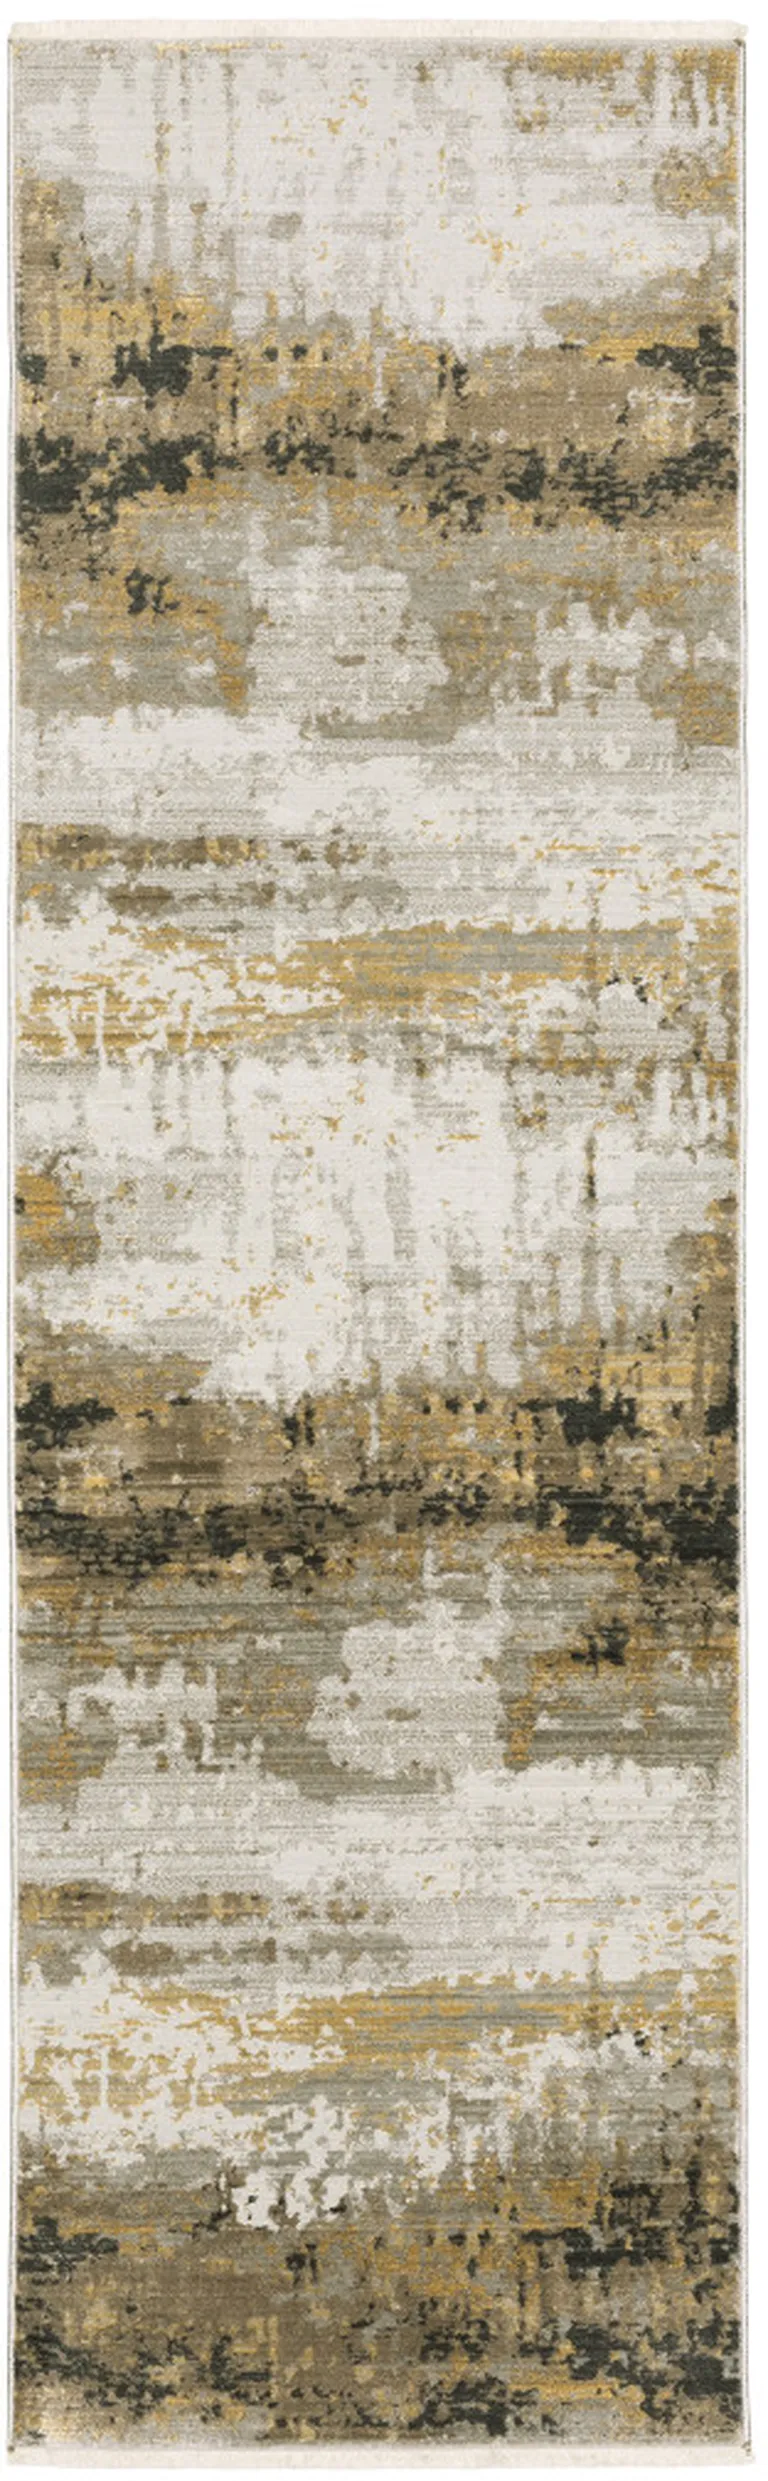 8' Grey Gold Black Charcoal And Beige Abstract Power Loom Runner Rug With Fringe Photo 1